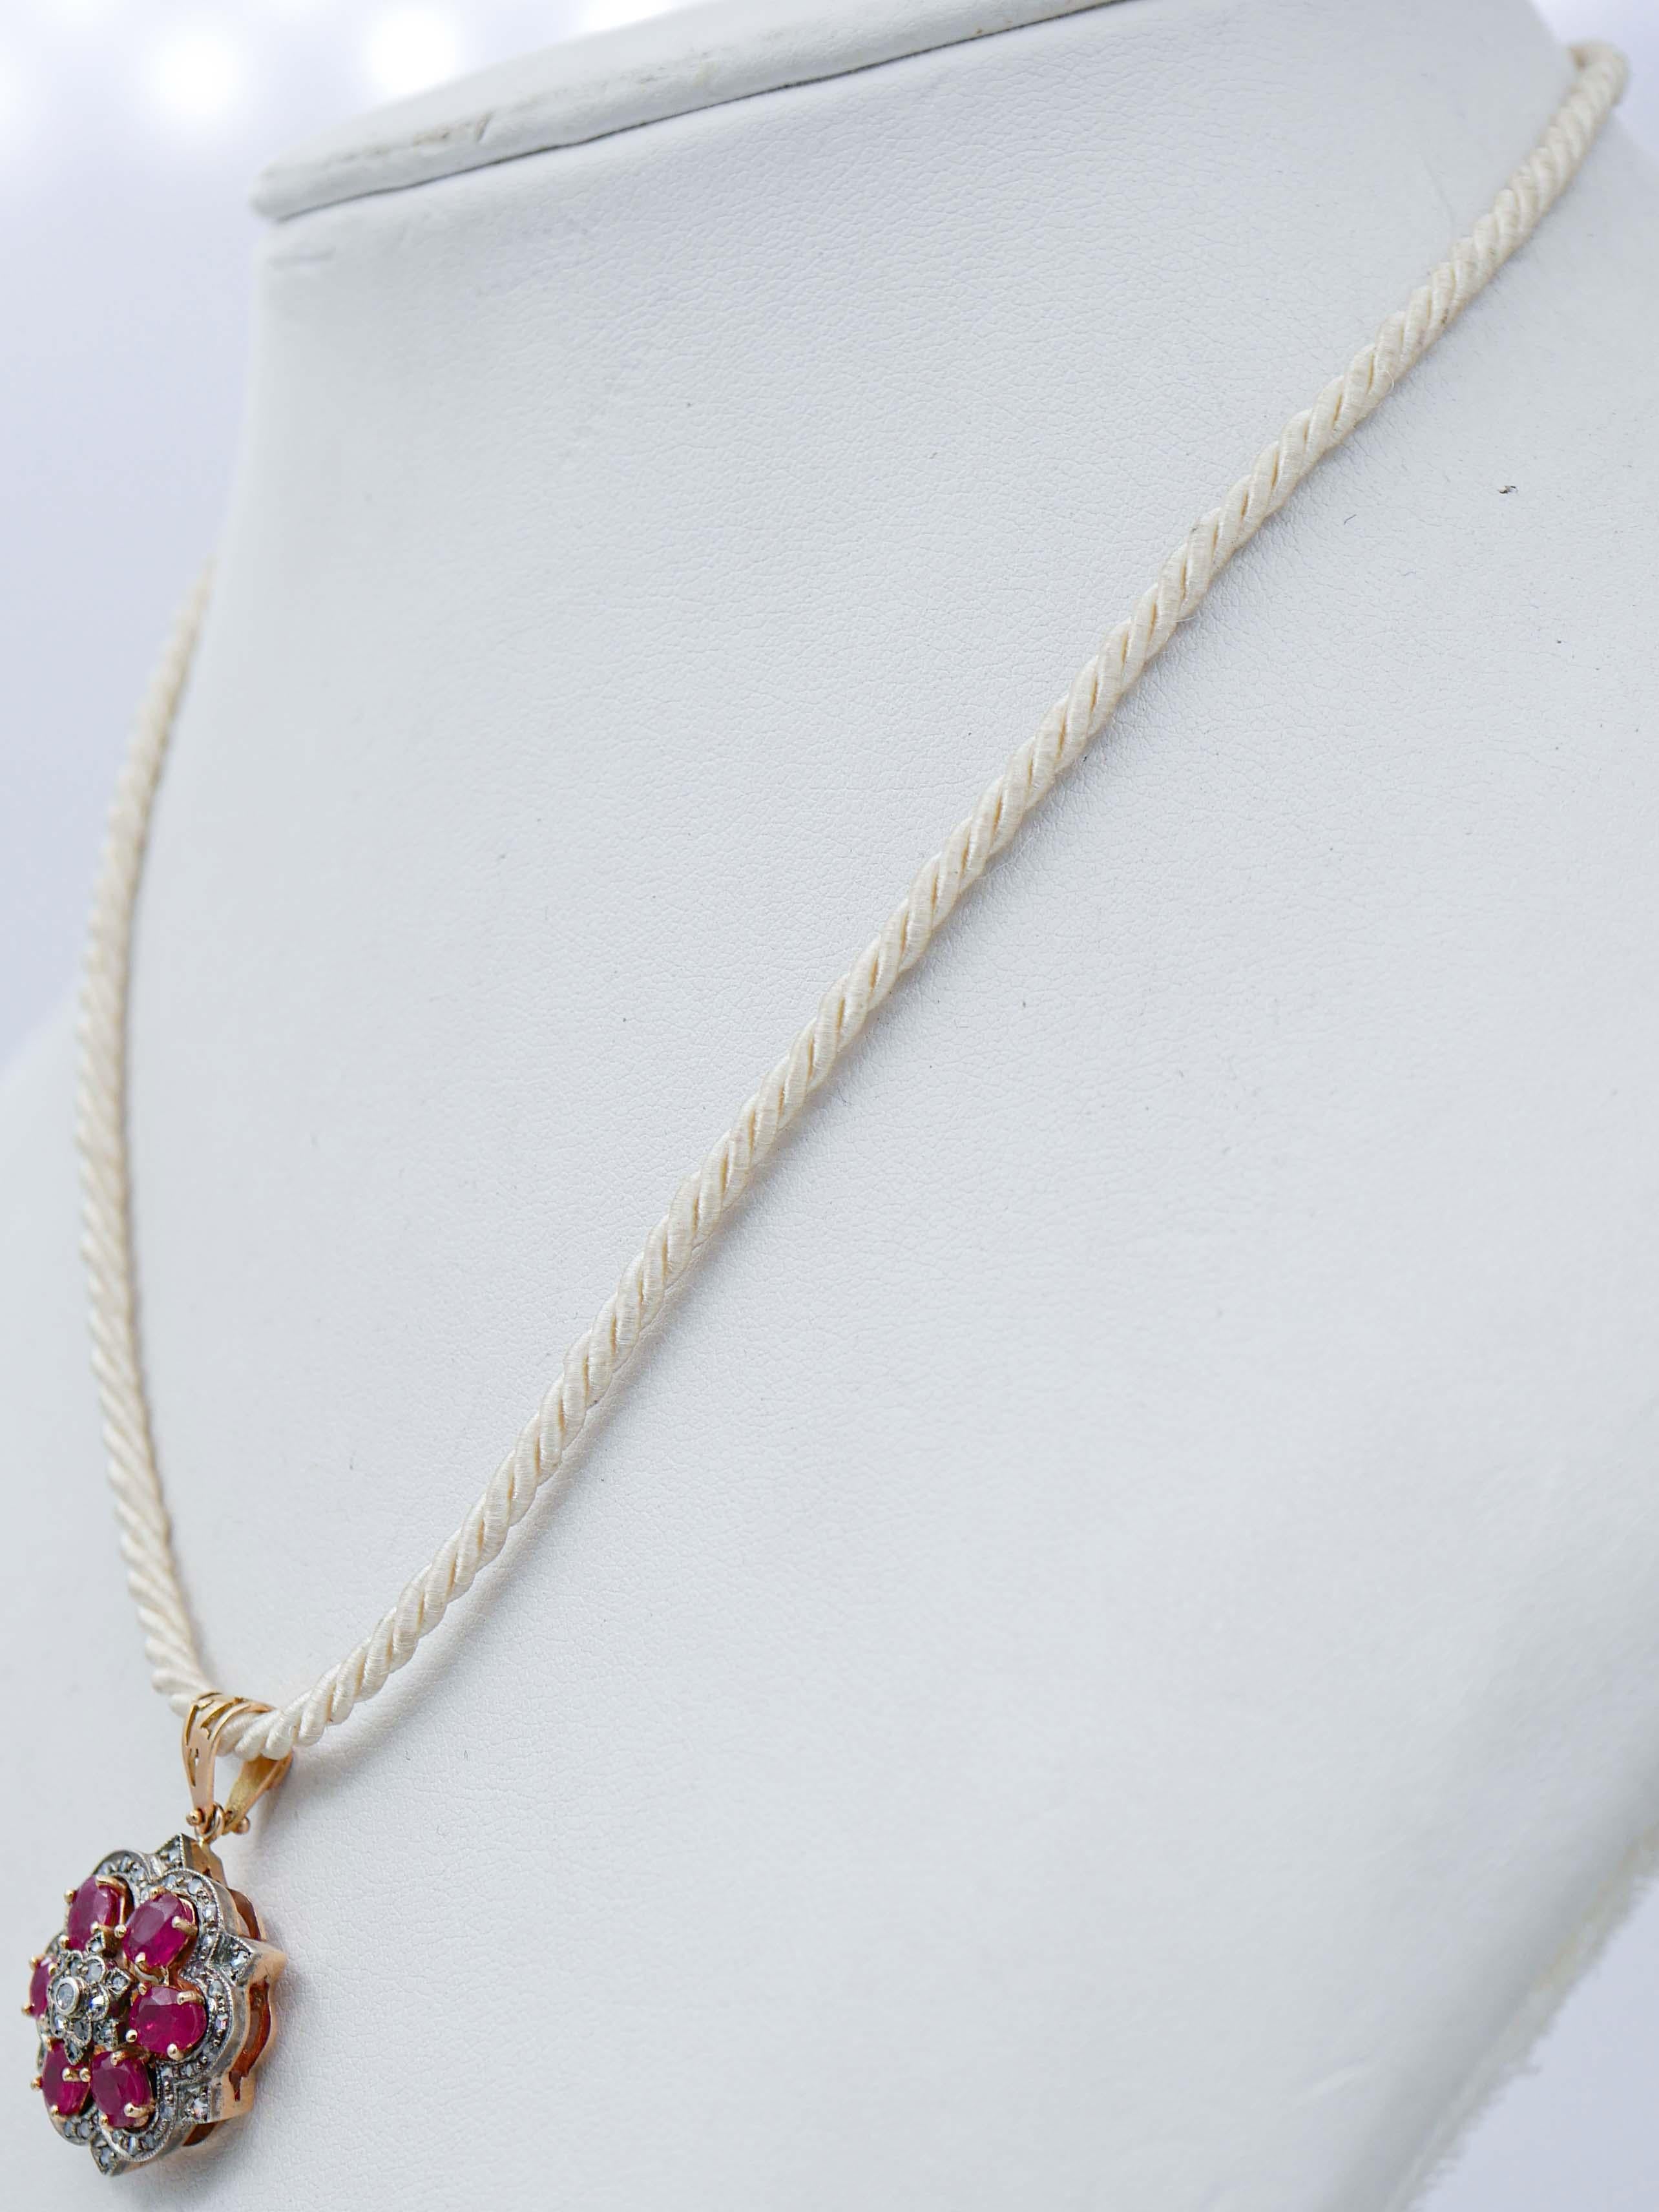 Retro Rubies, Diamonds, 14 Karat Rose Gold and Silver Pendant Necklace. For Sale